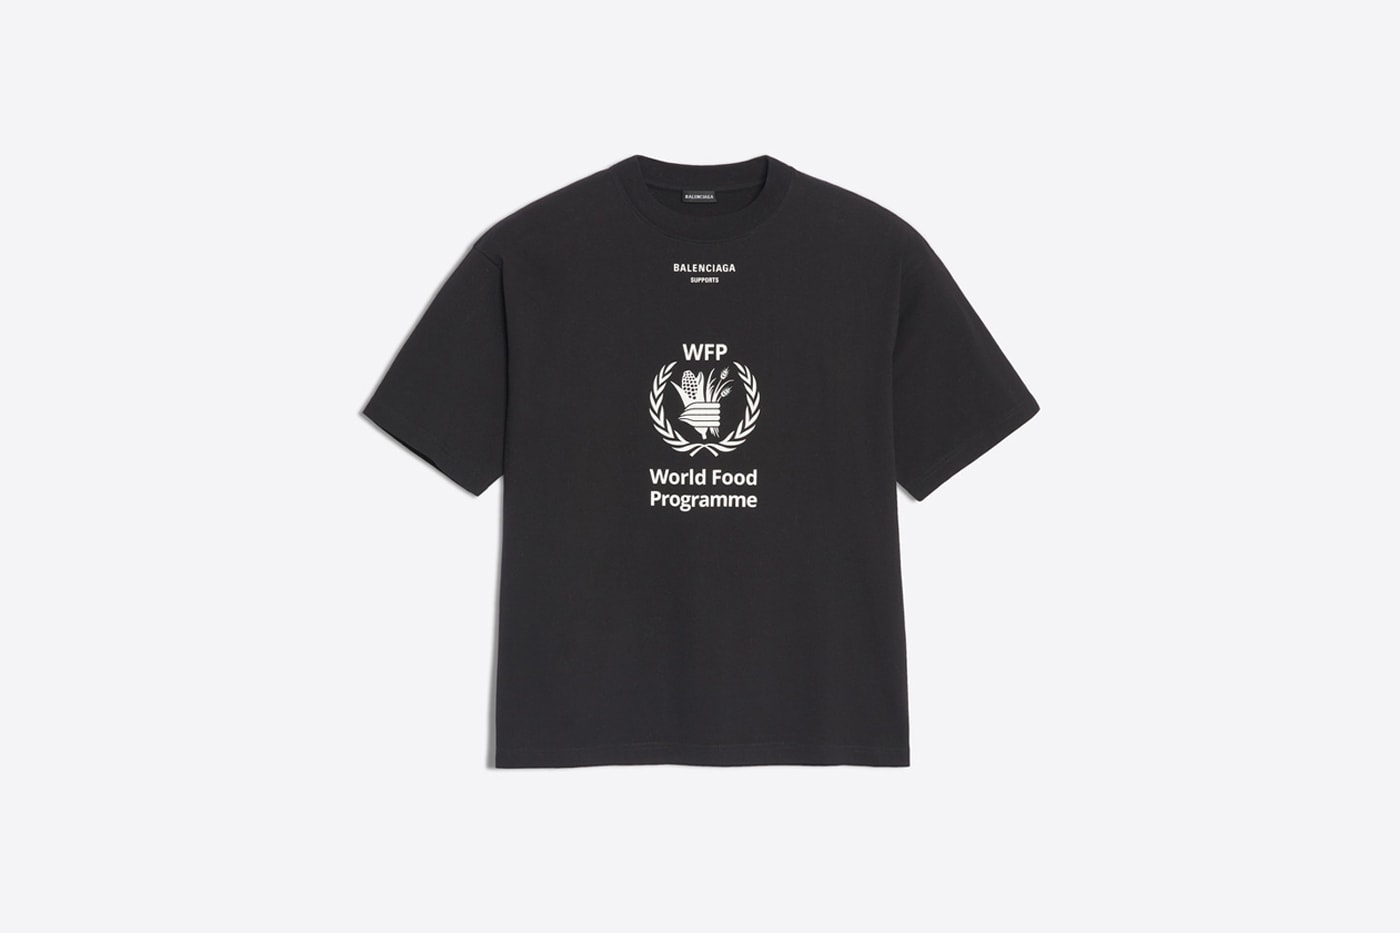 Balenciaga The World Food Programme Capsule collection fall winter 2018 united nations release info